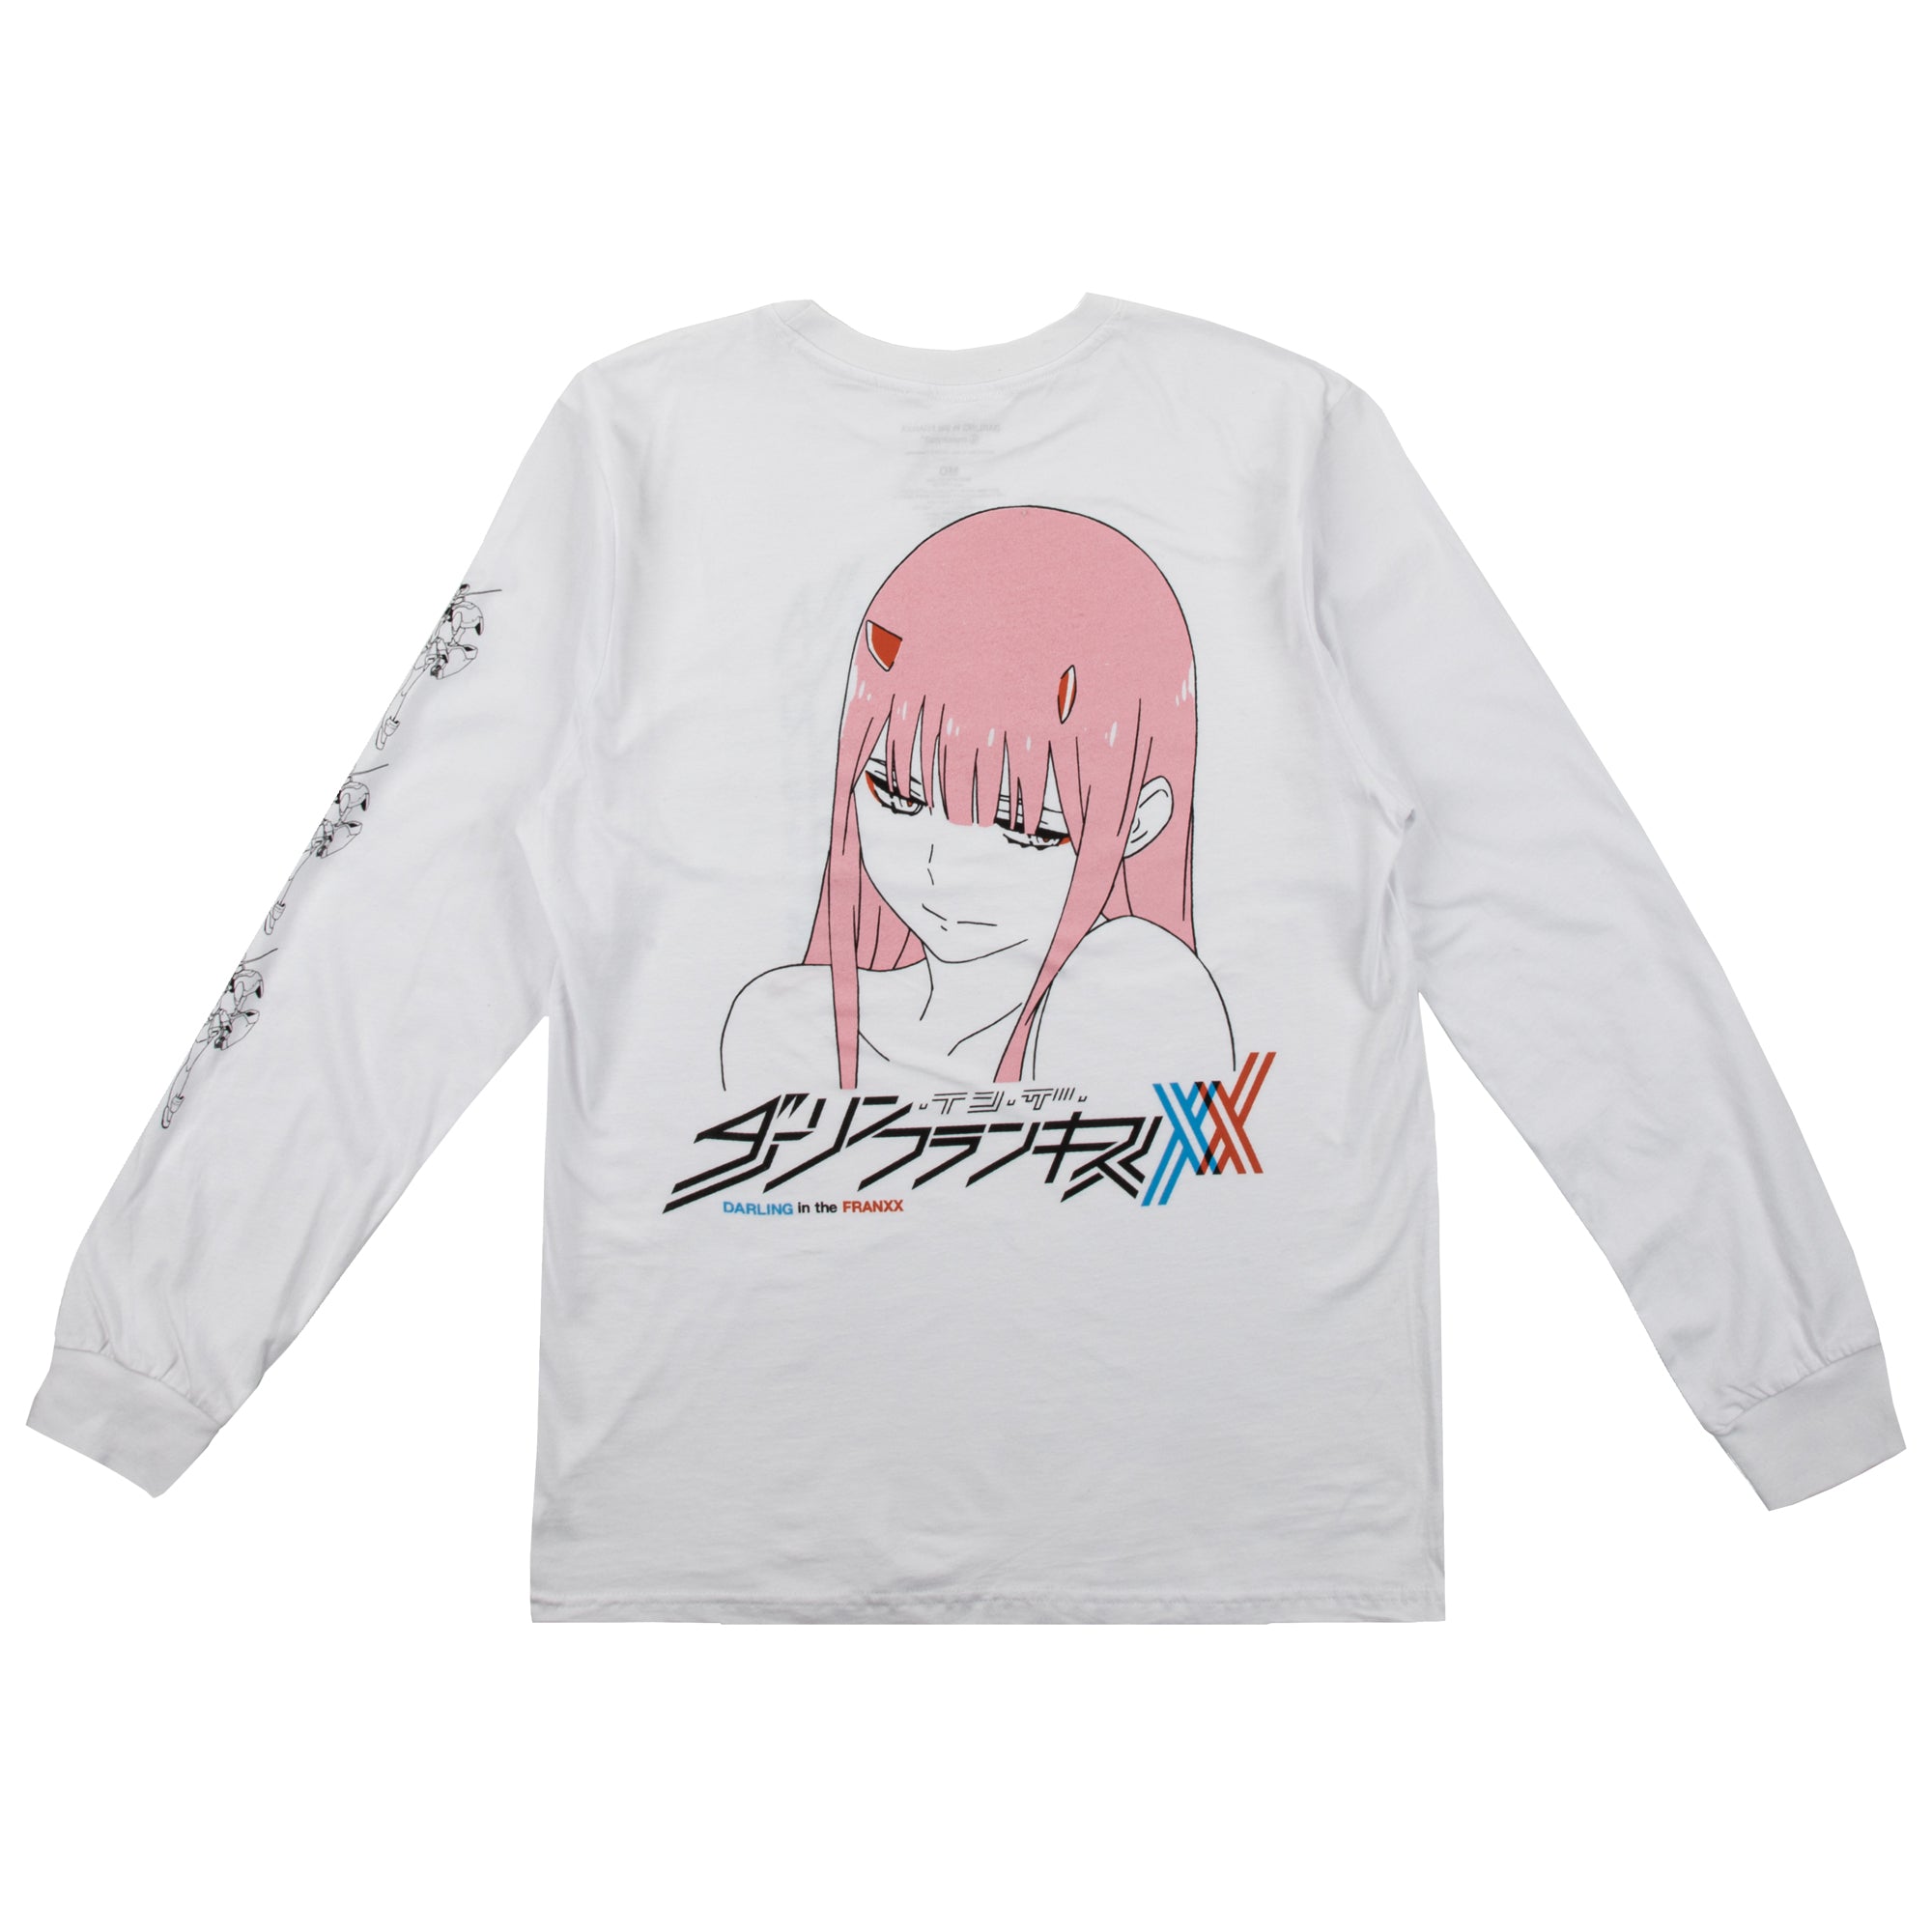 DARLING in the FRANXX - Zero Two Bust Strelizia Long Sleeve - Crunchyroll Exclusive! image count 1